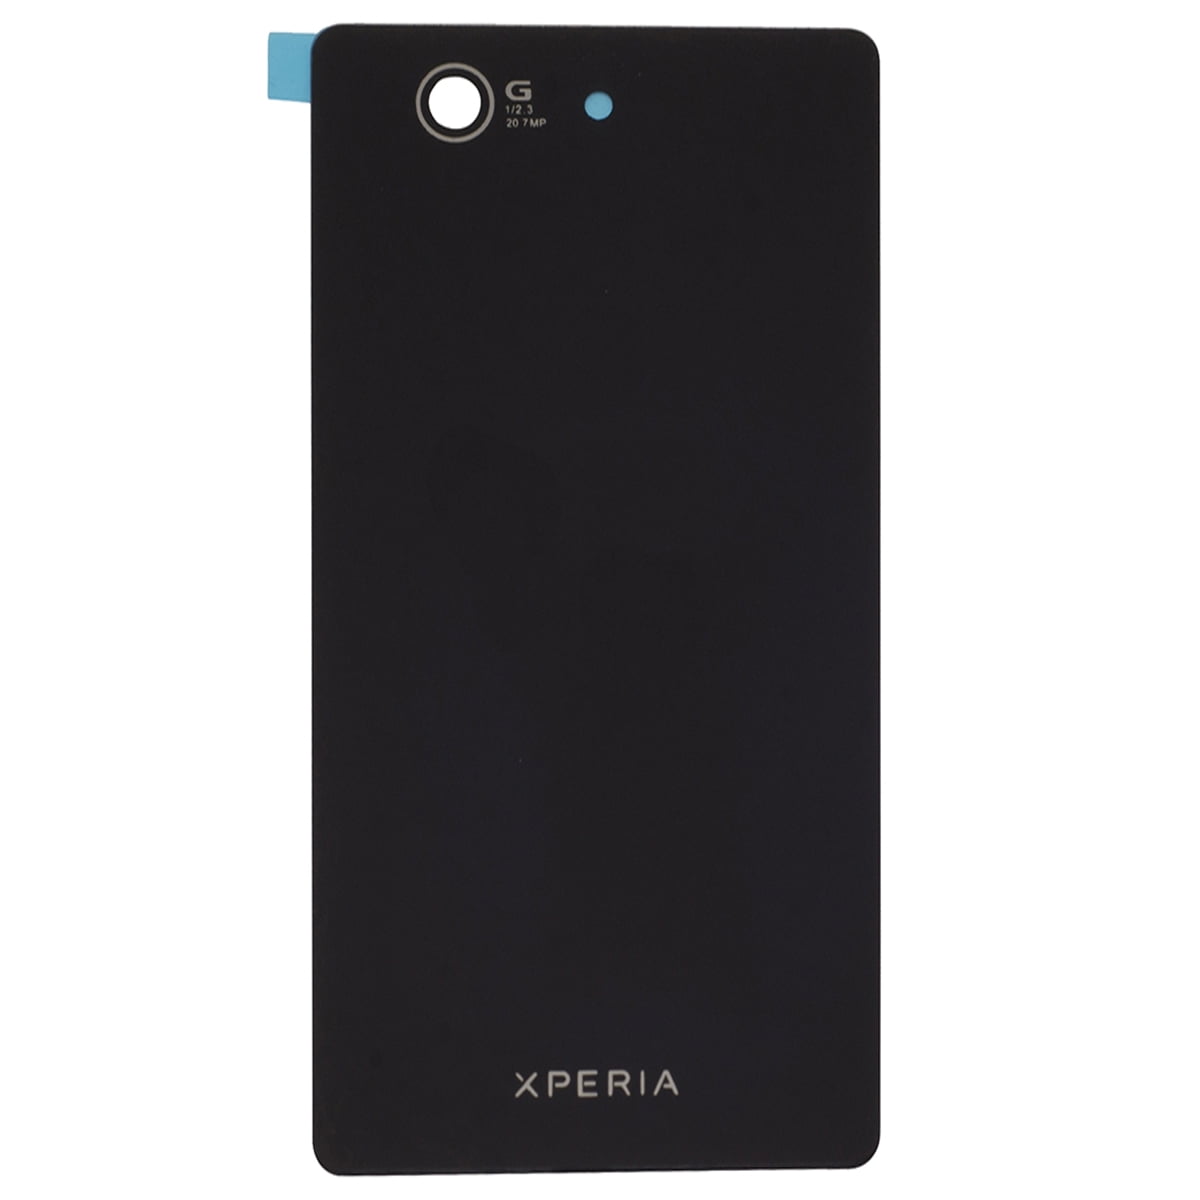 hospita George Stevenson Oude man Replacement Part for Sony Xperia Z3 Compact Back Battery Door Housing -  Black - Walmart.com